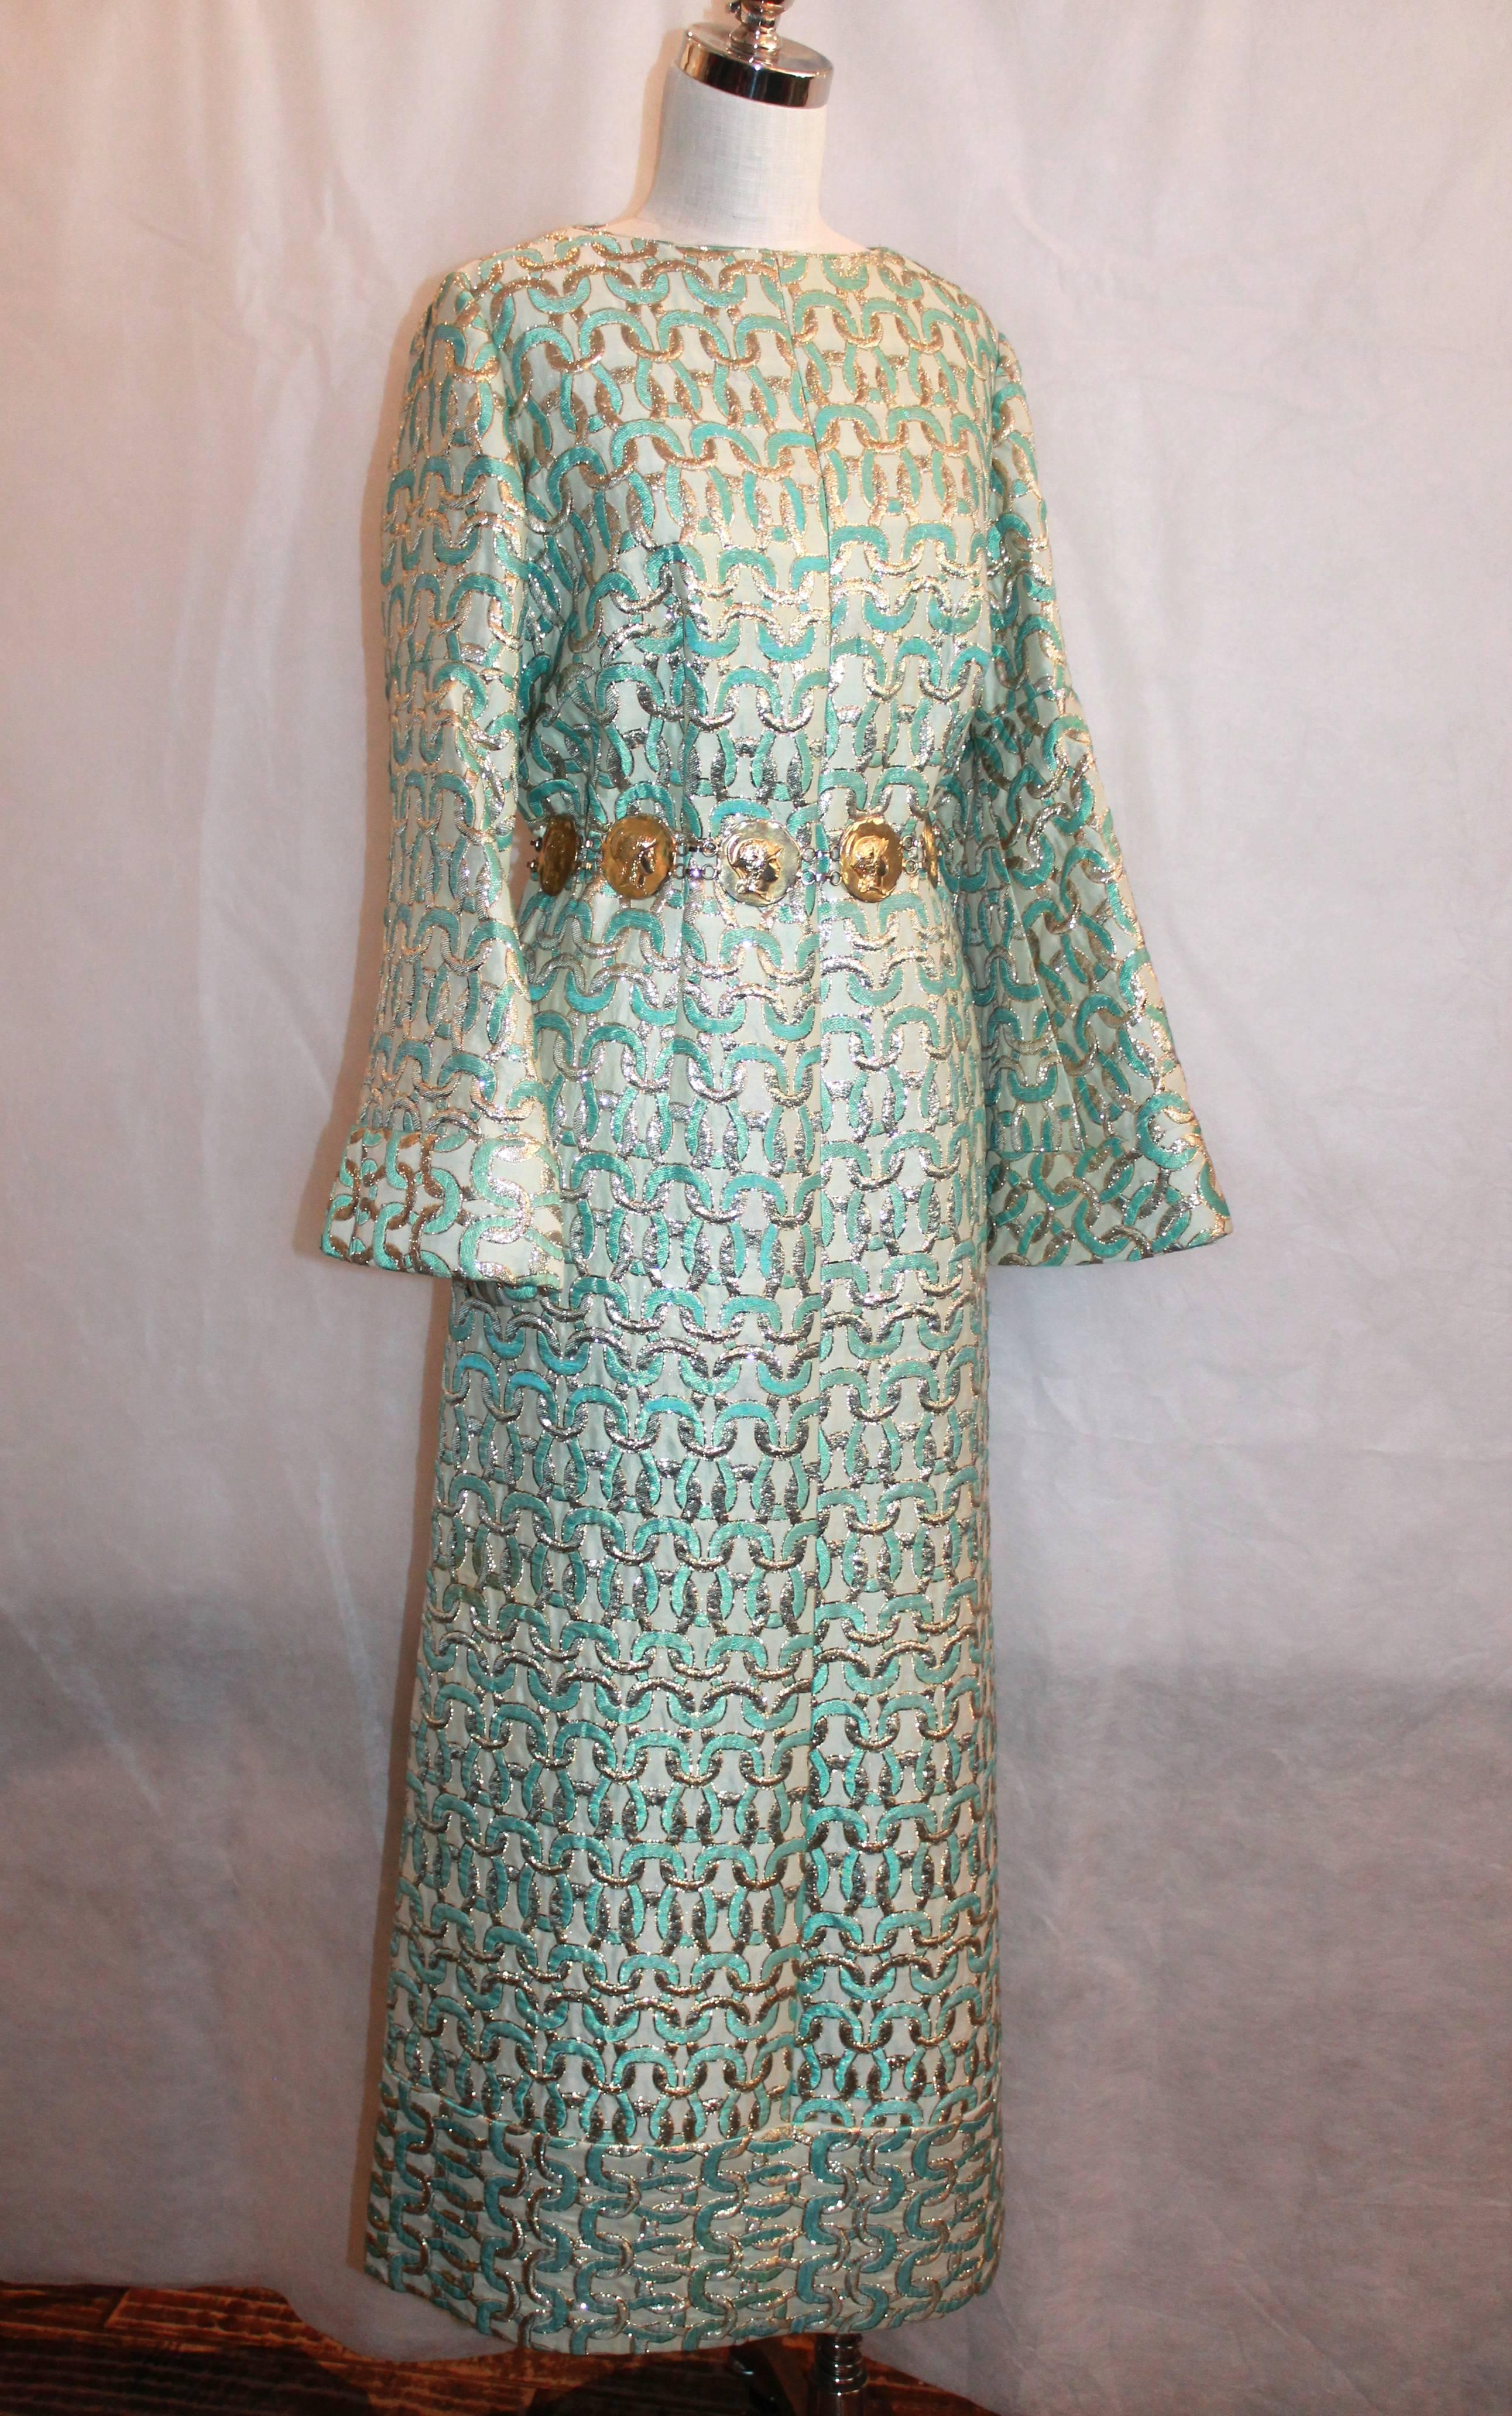 1960's Sarmi Gold & Aqua Brocade Vintage Long Sleeve Gown - L.  This gorgeous gown from the 1960's is in excellent vintage condition with only slight fade from age on the gold belt.  It features extra wide sleeves and beautiful